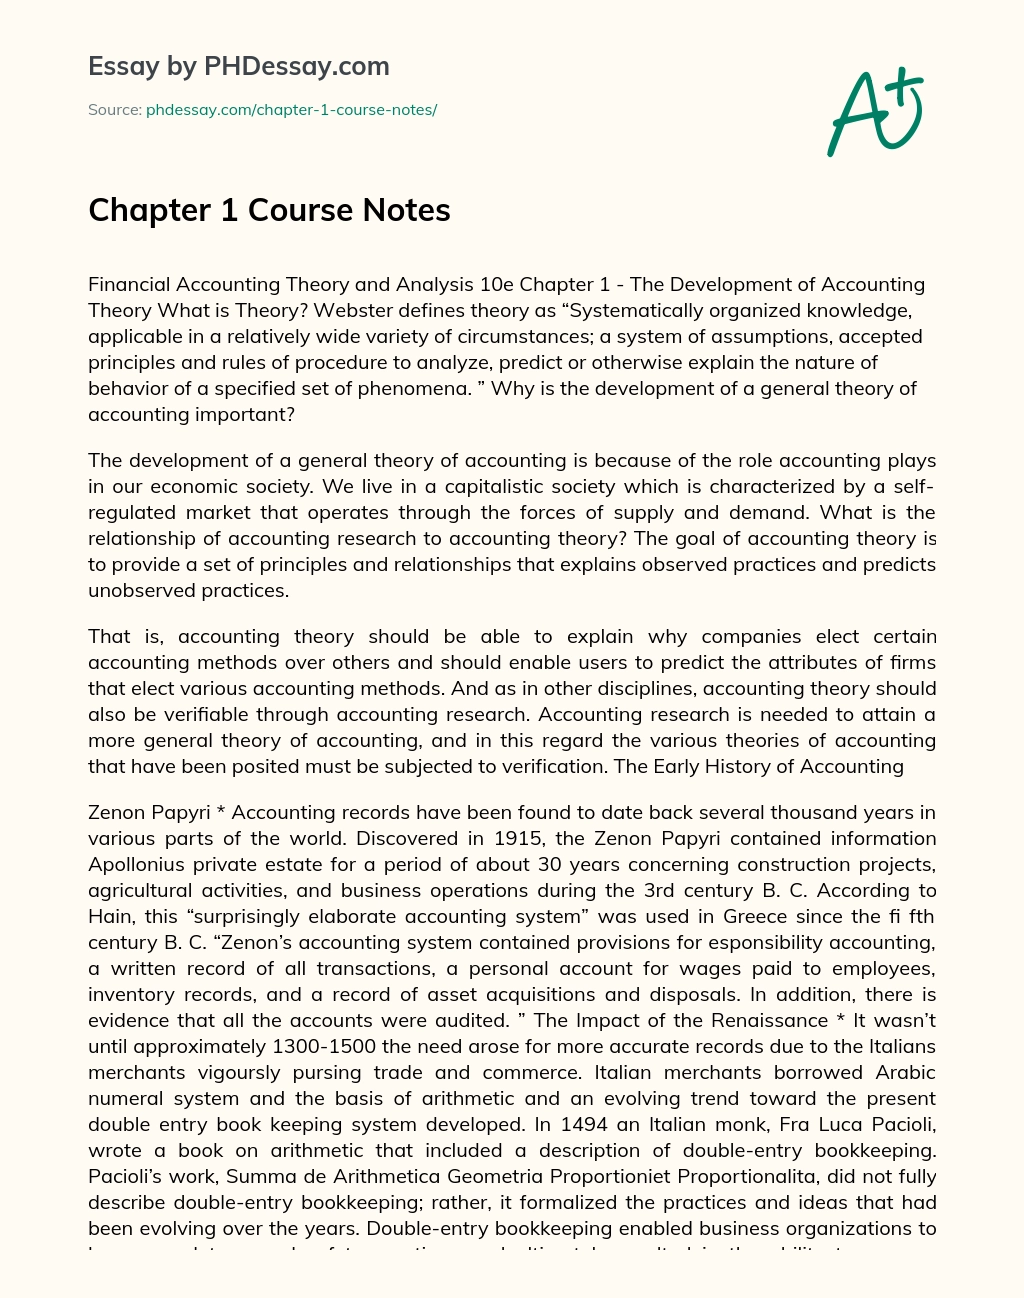 Chapter 1 Course Notes essay